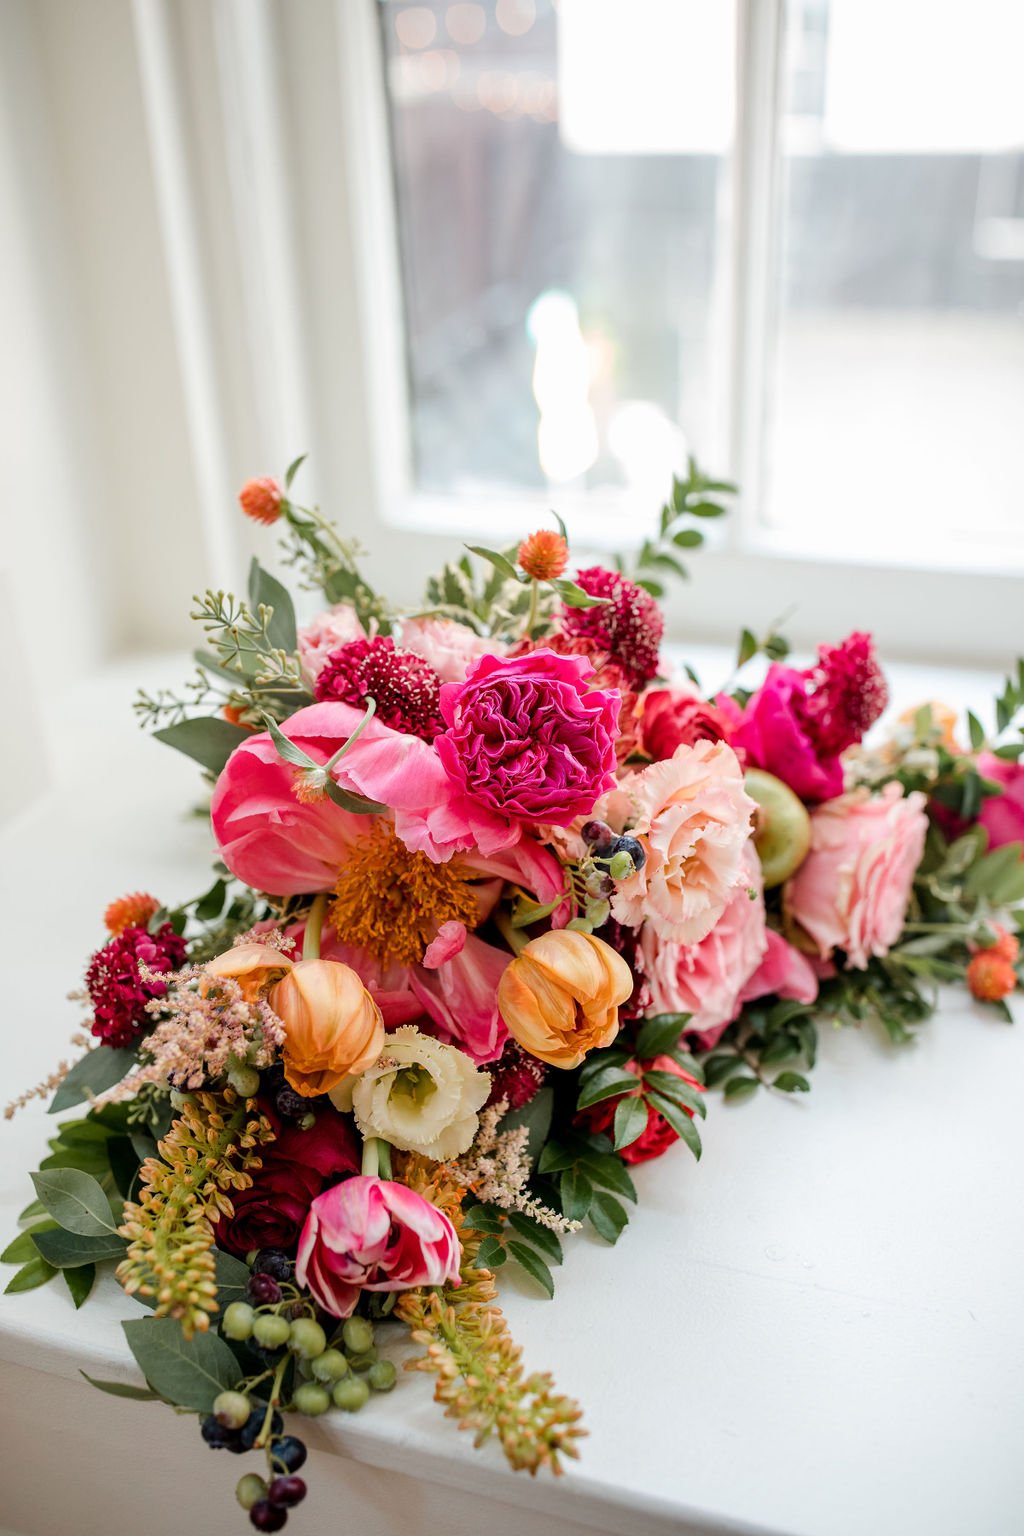 Lush and artful bridal bouquet with textural accents. Balanced color palette of pinks, oranges and muted burgundy tones featuring garden roses, peonies, ranunculus and tulips. Nashville wedding florist at Hotel Noelle.